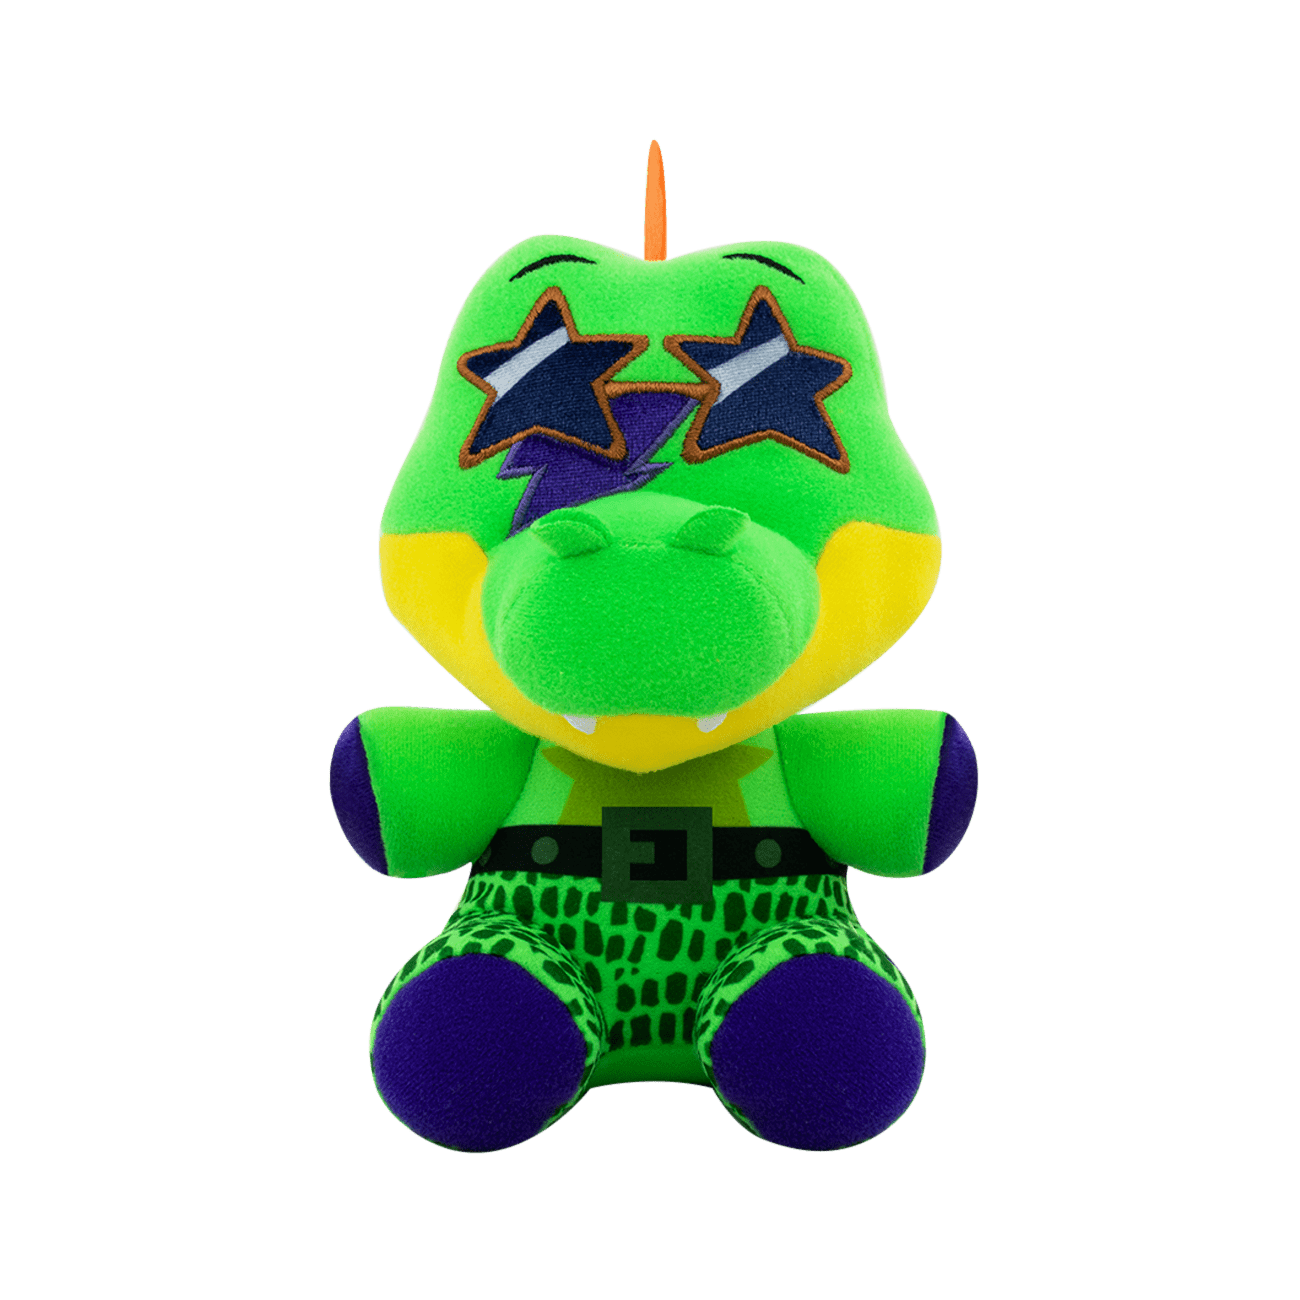 Funko Five Nights at Freddy's Security Breach Plush Montgomery Gator 7"stock D4 for sale online